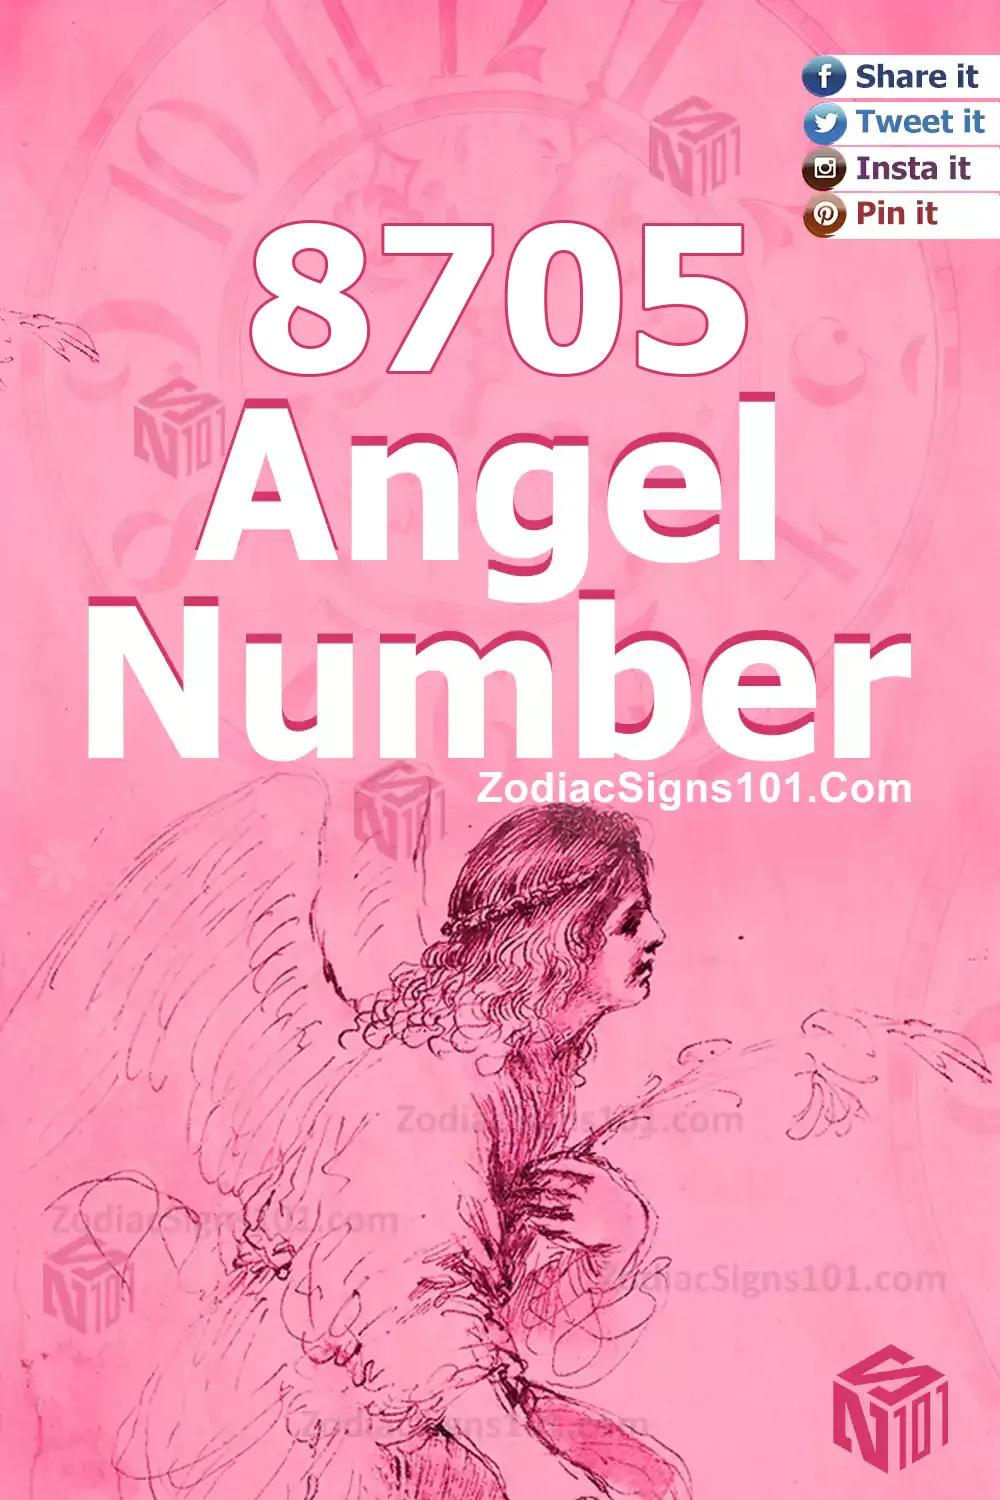 8705 Angel Number Meaning